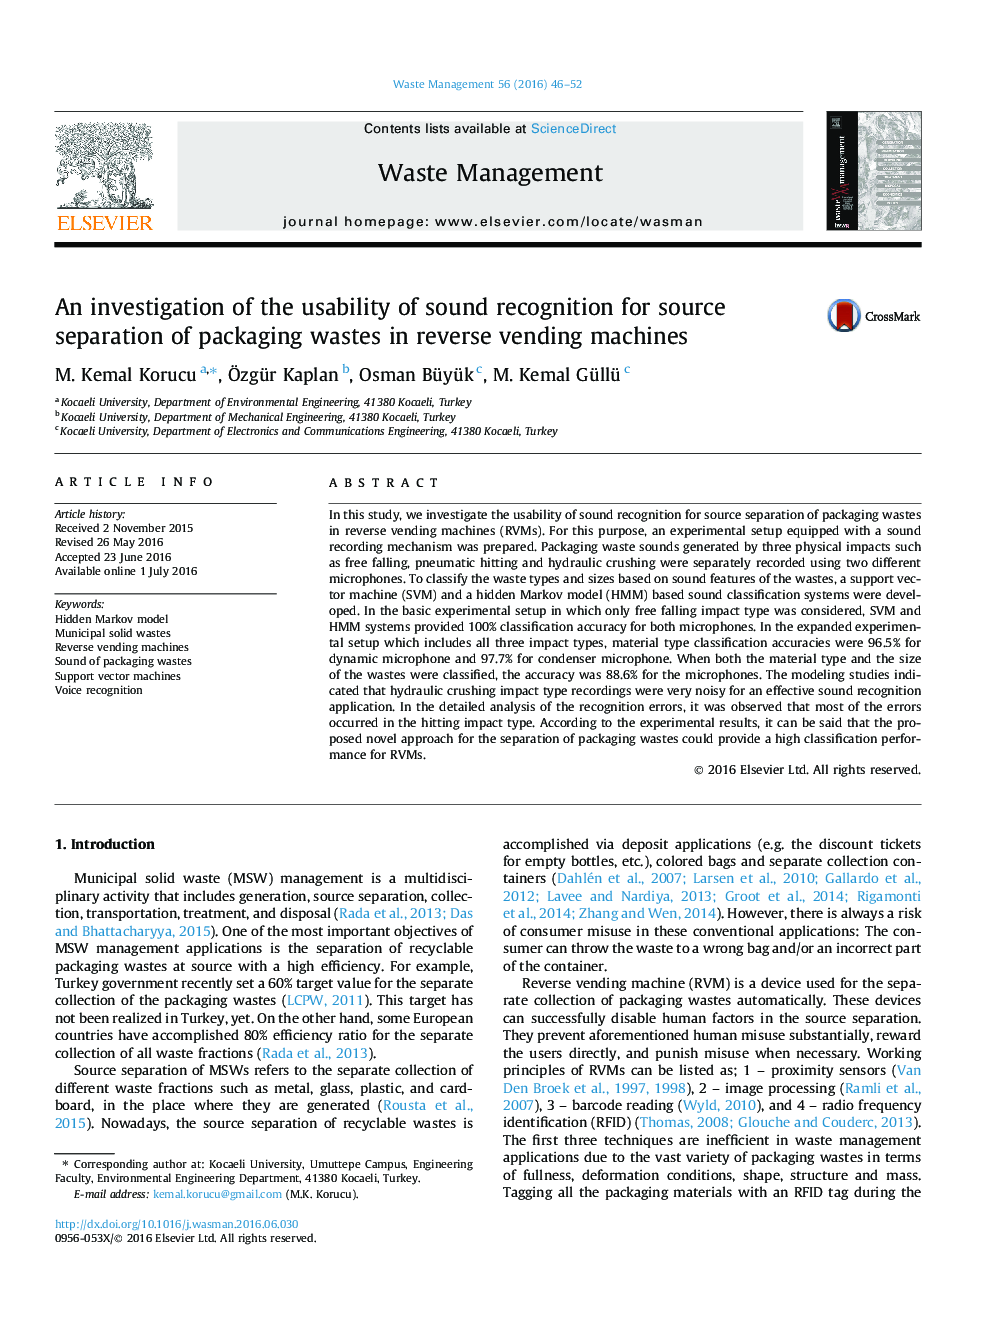 An investigation of the usability of sound recognition for source separation of packaging wastes in reverse vending machines